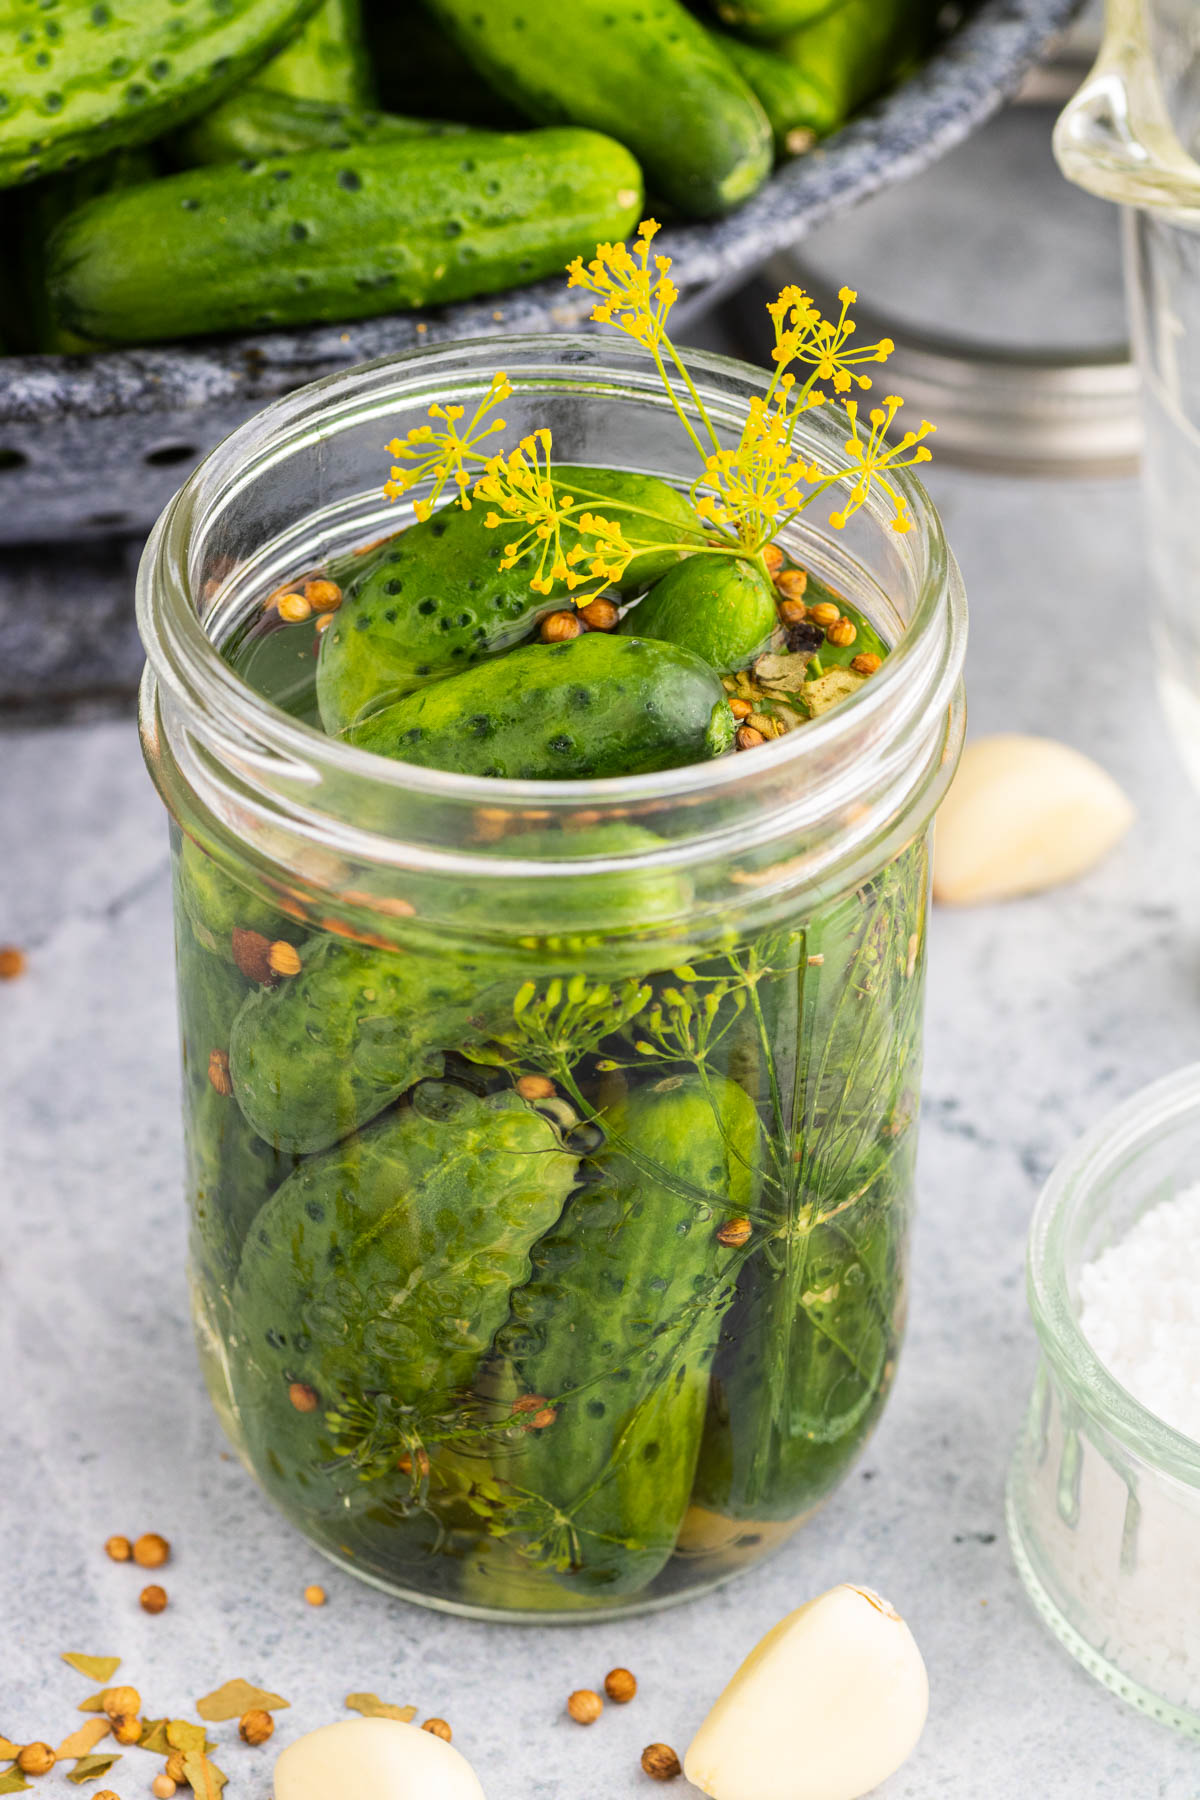 Small cucumbers in a jar along with garlic, dill, and pickling spices.